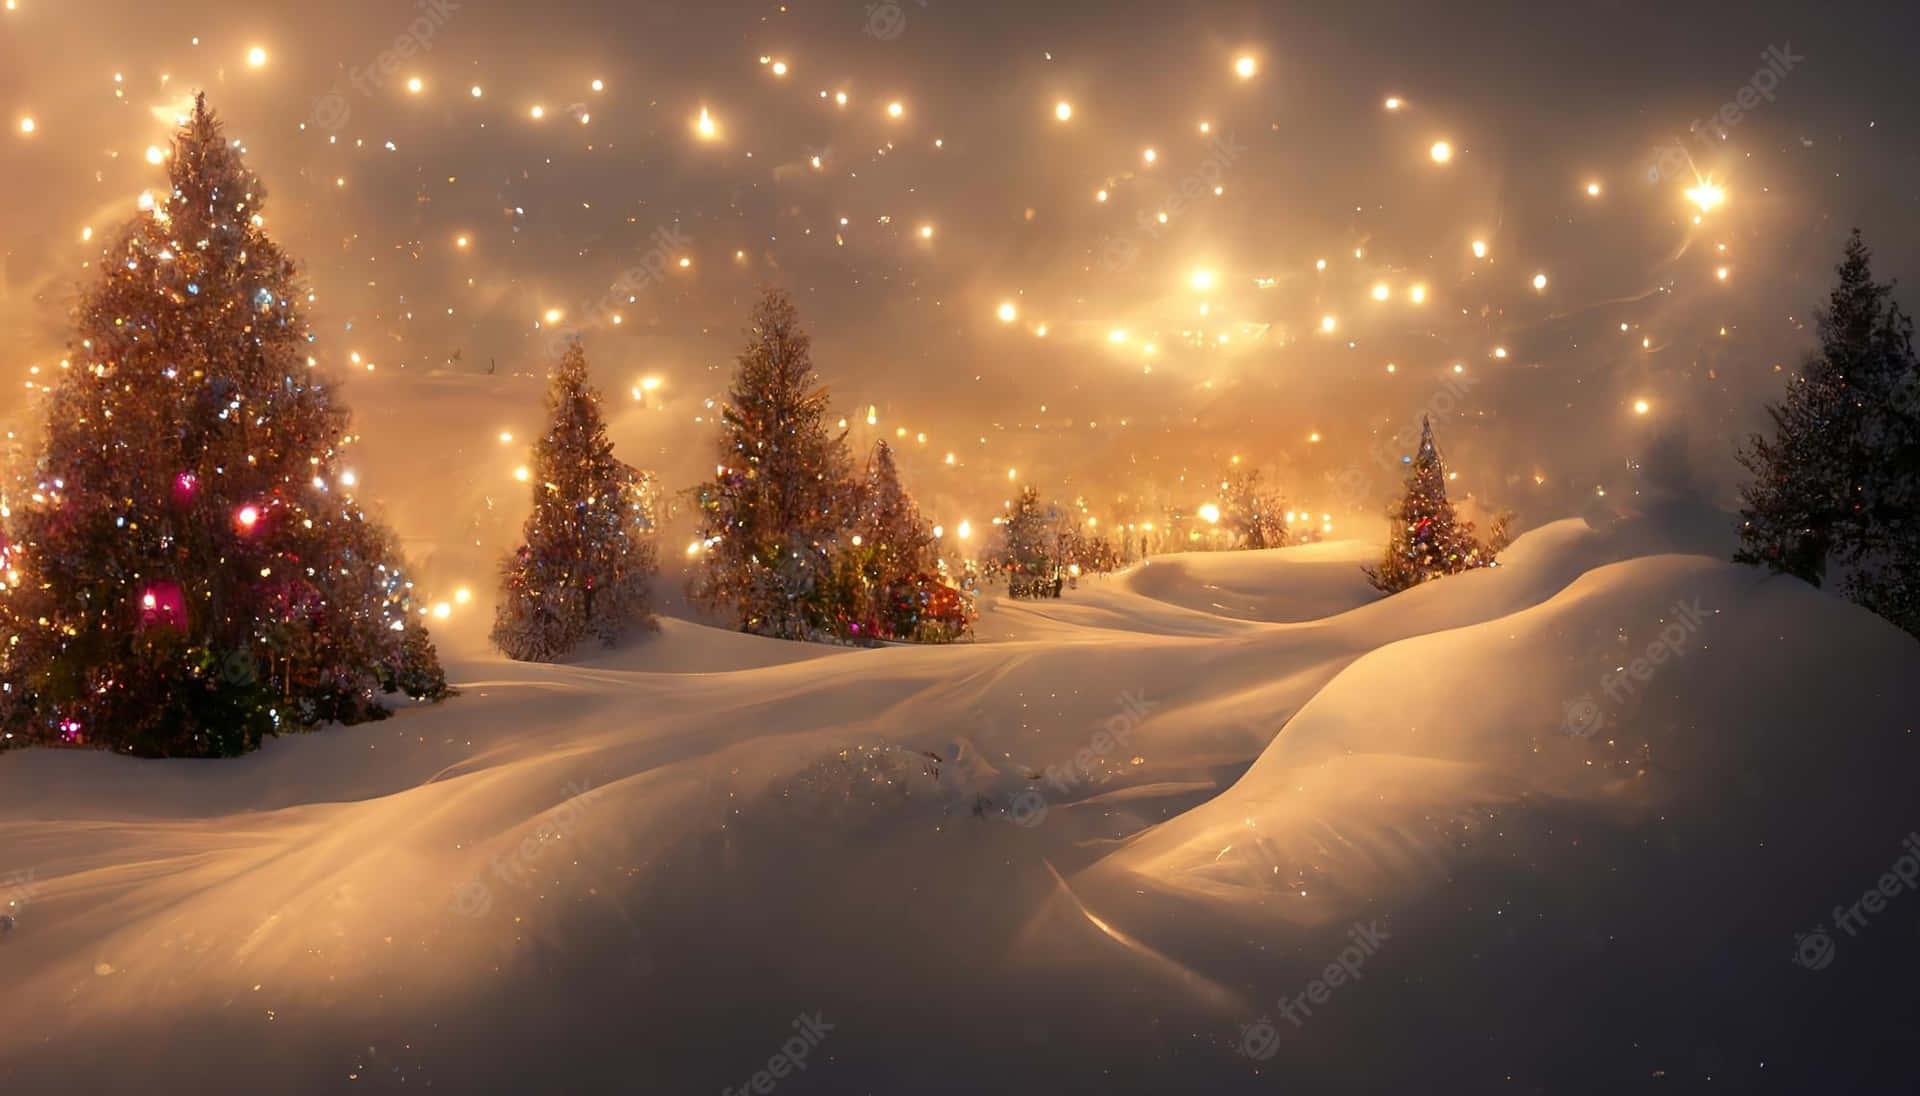 Enjoy The Winter Christmas Ambiance With A Desktop